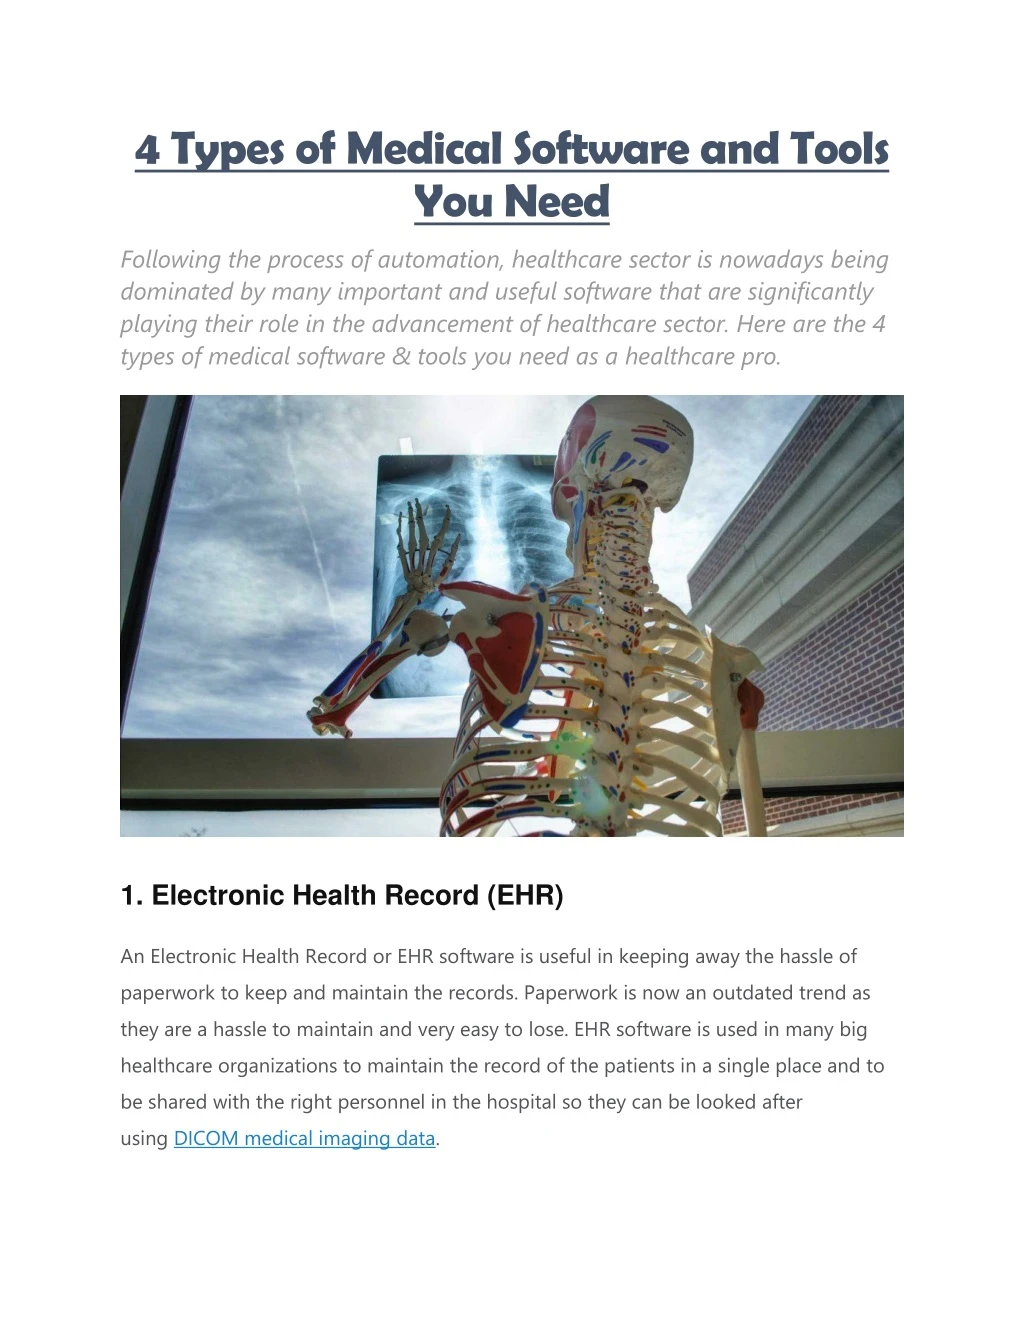 4 types of medical software and tools you need